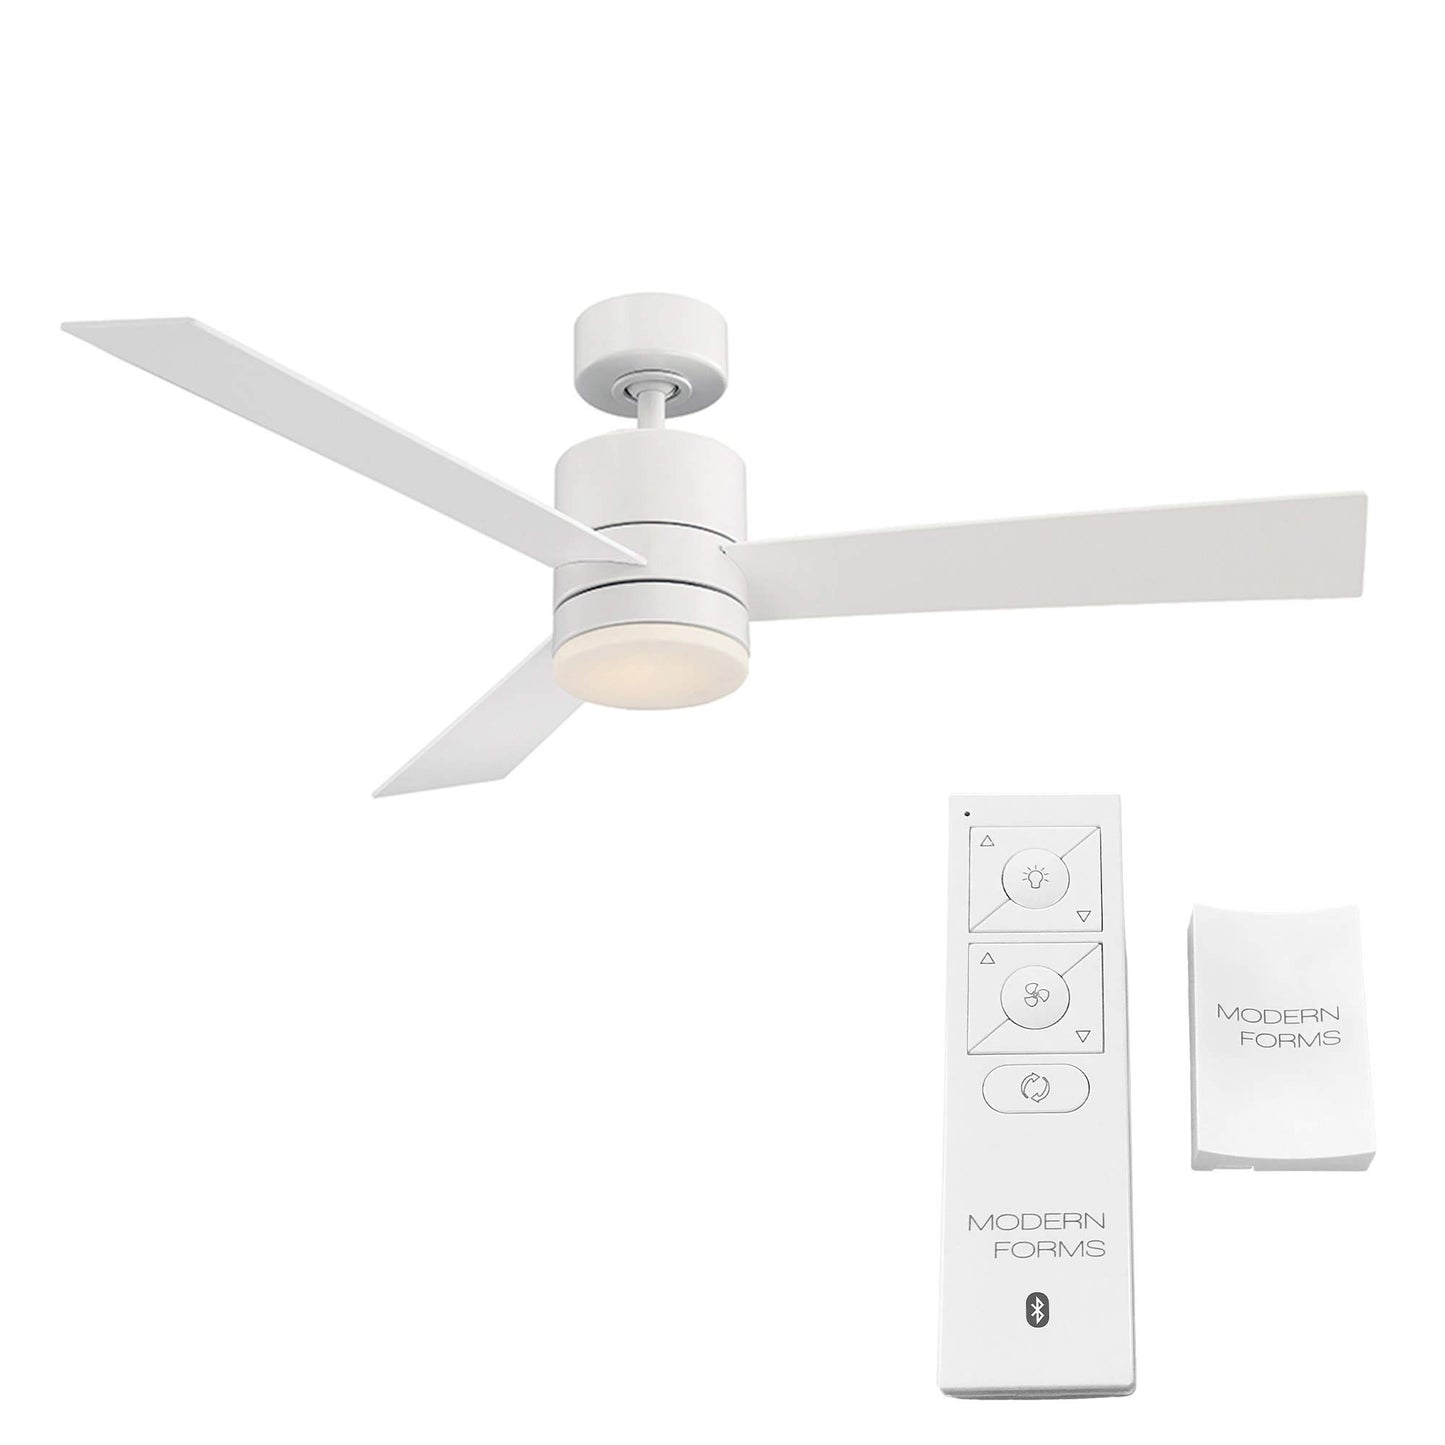 Axis Smart Indoor and Outdoor 3-Blade Ceiling Fan 52in Matte White with 2700K LED Light Kit and Remote Control works with Alexa, Google Assistant, Samsung Things, and iOS or Android App - Like New